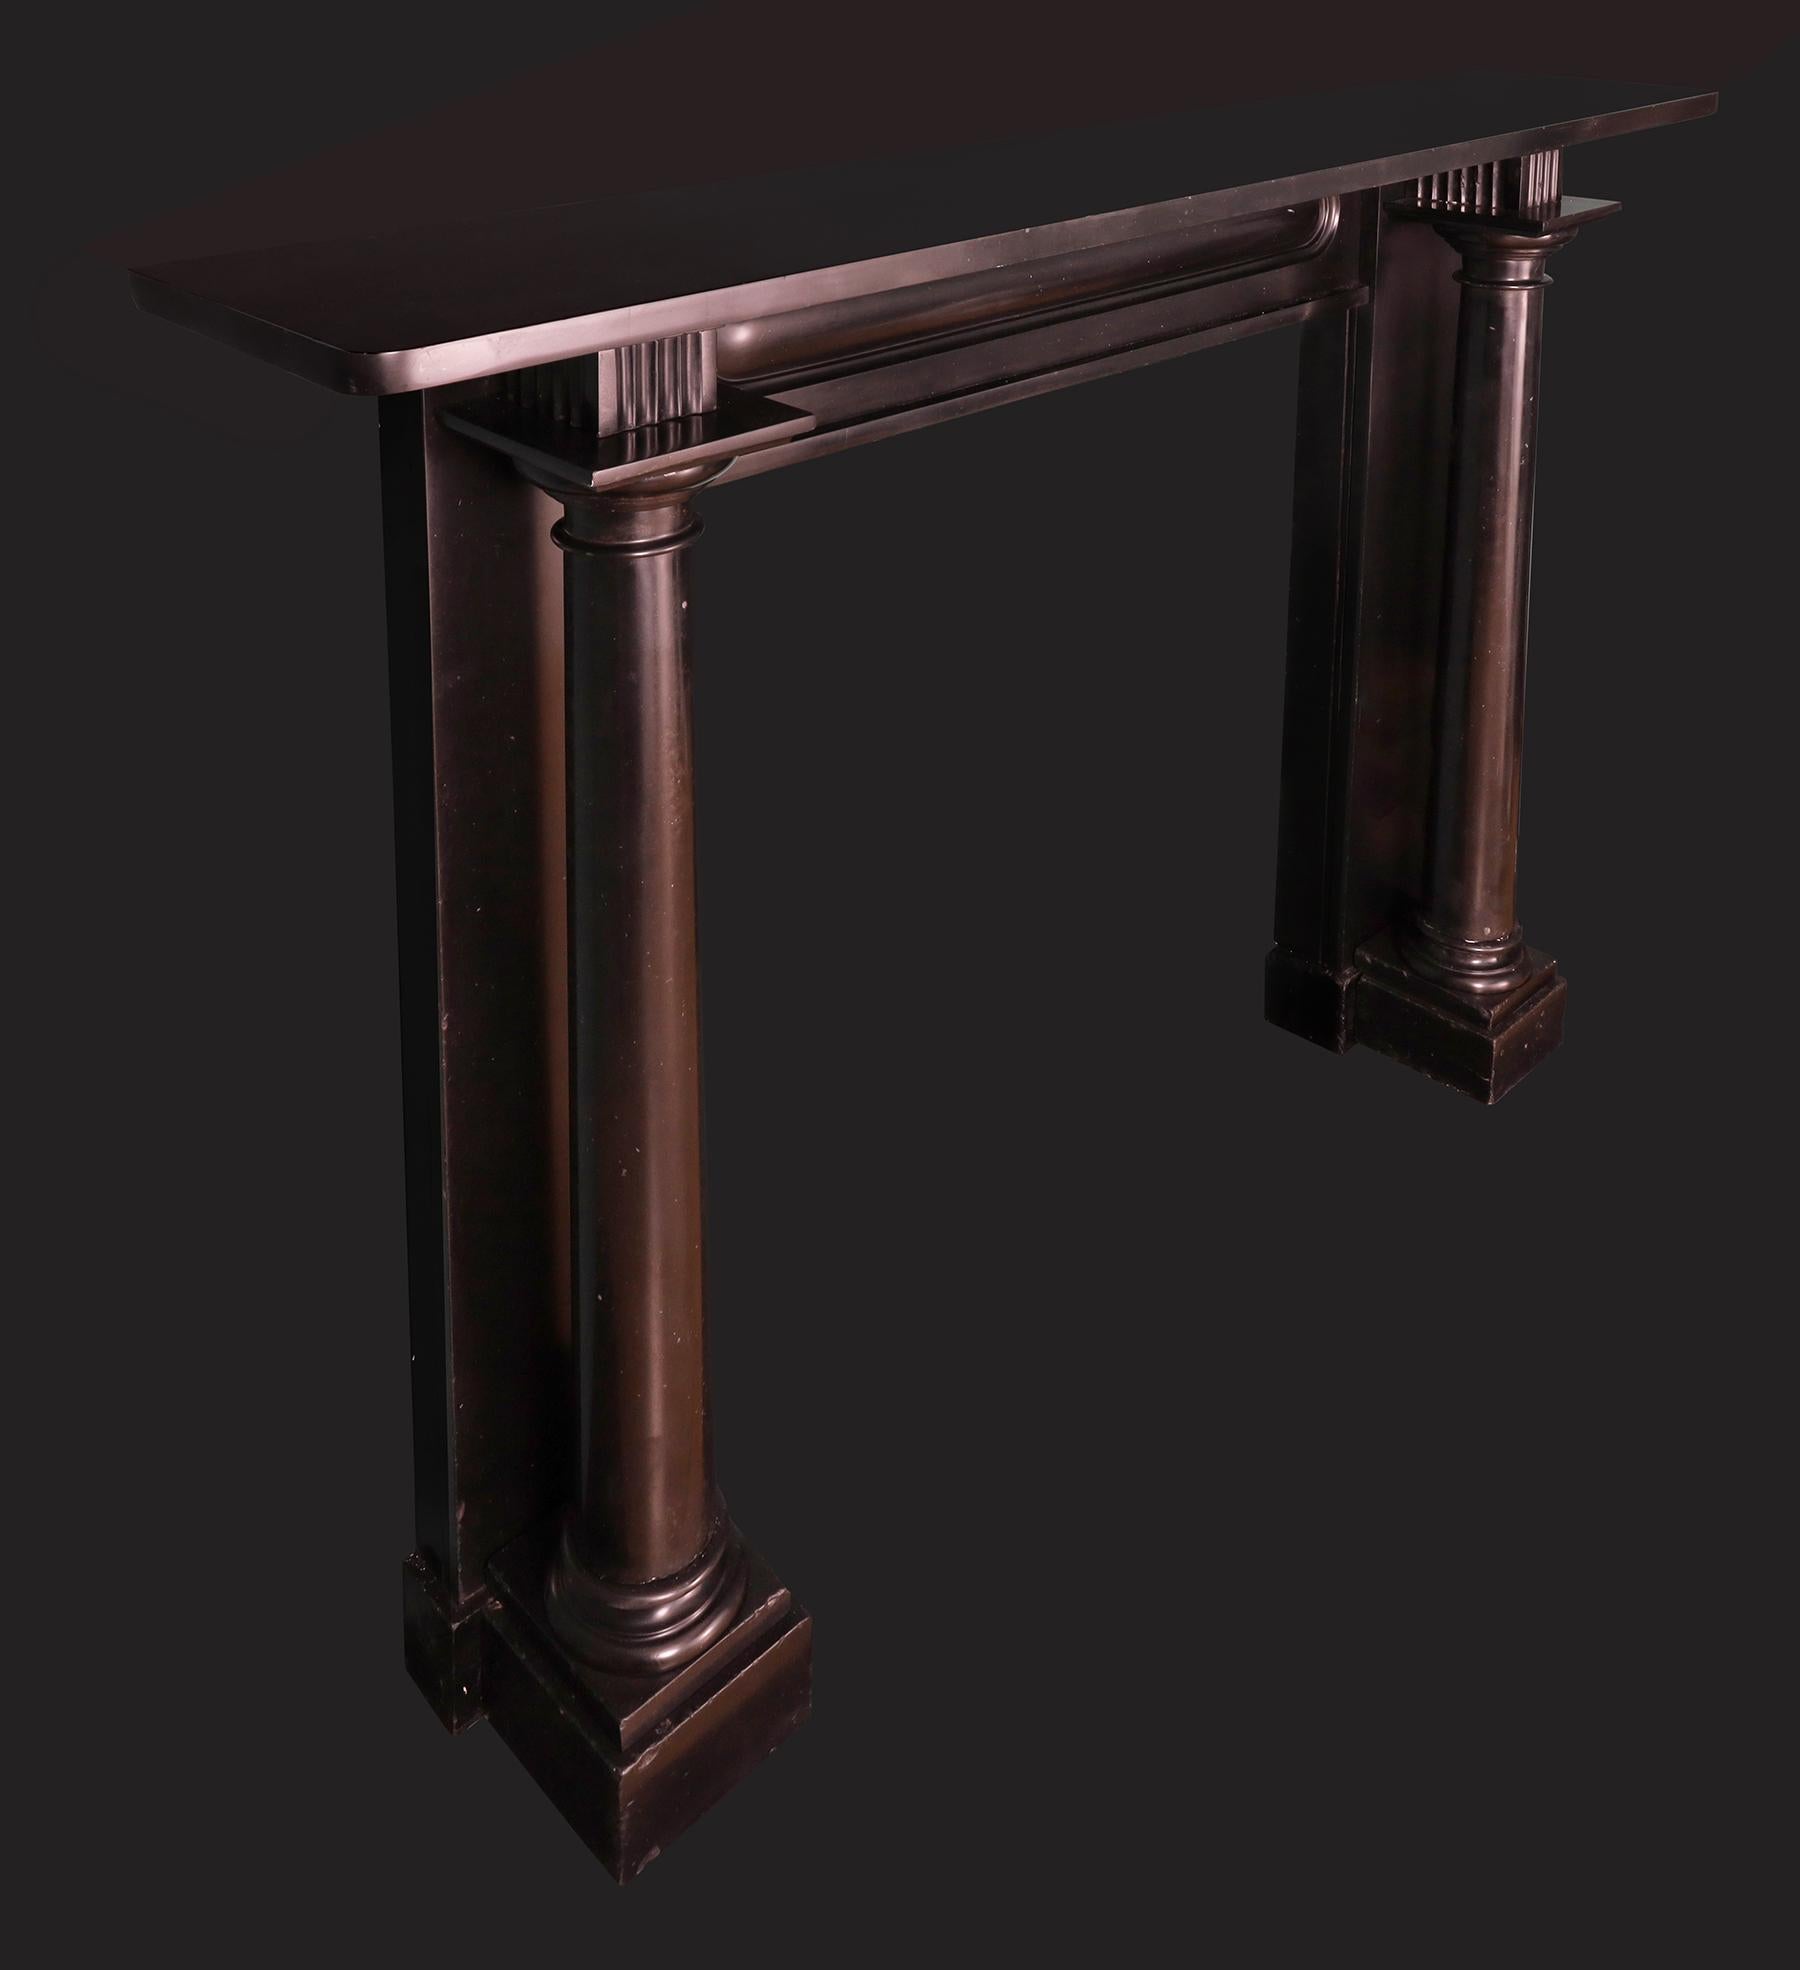 An Irish Regency Period Black Kilkenny Marble Fireplace Mantel. A substantial and superior quality chimneypiece in black Irish Kilkenny marble, early 19th century Regency period fireplace, with detached columns supported on square footblocks,